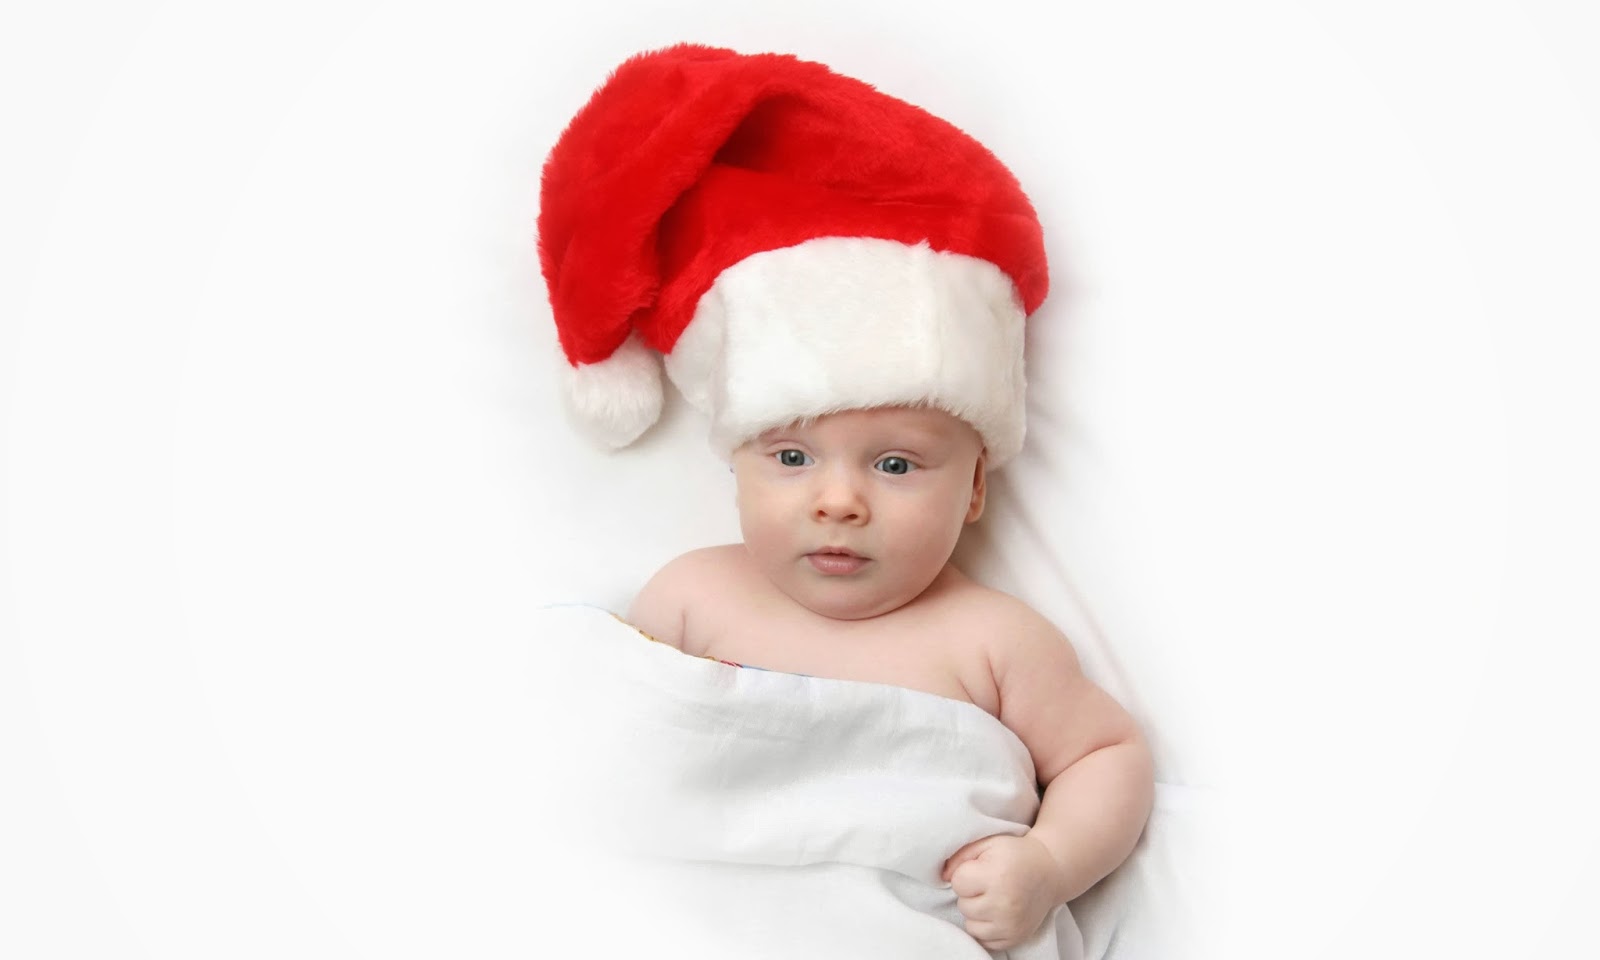 Christmas Babies Full Hd Wallpapers 1080p Free Download - Baby Photos Gallery Indian , HD Wallpaper & Backgrounds